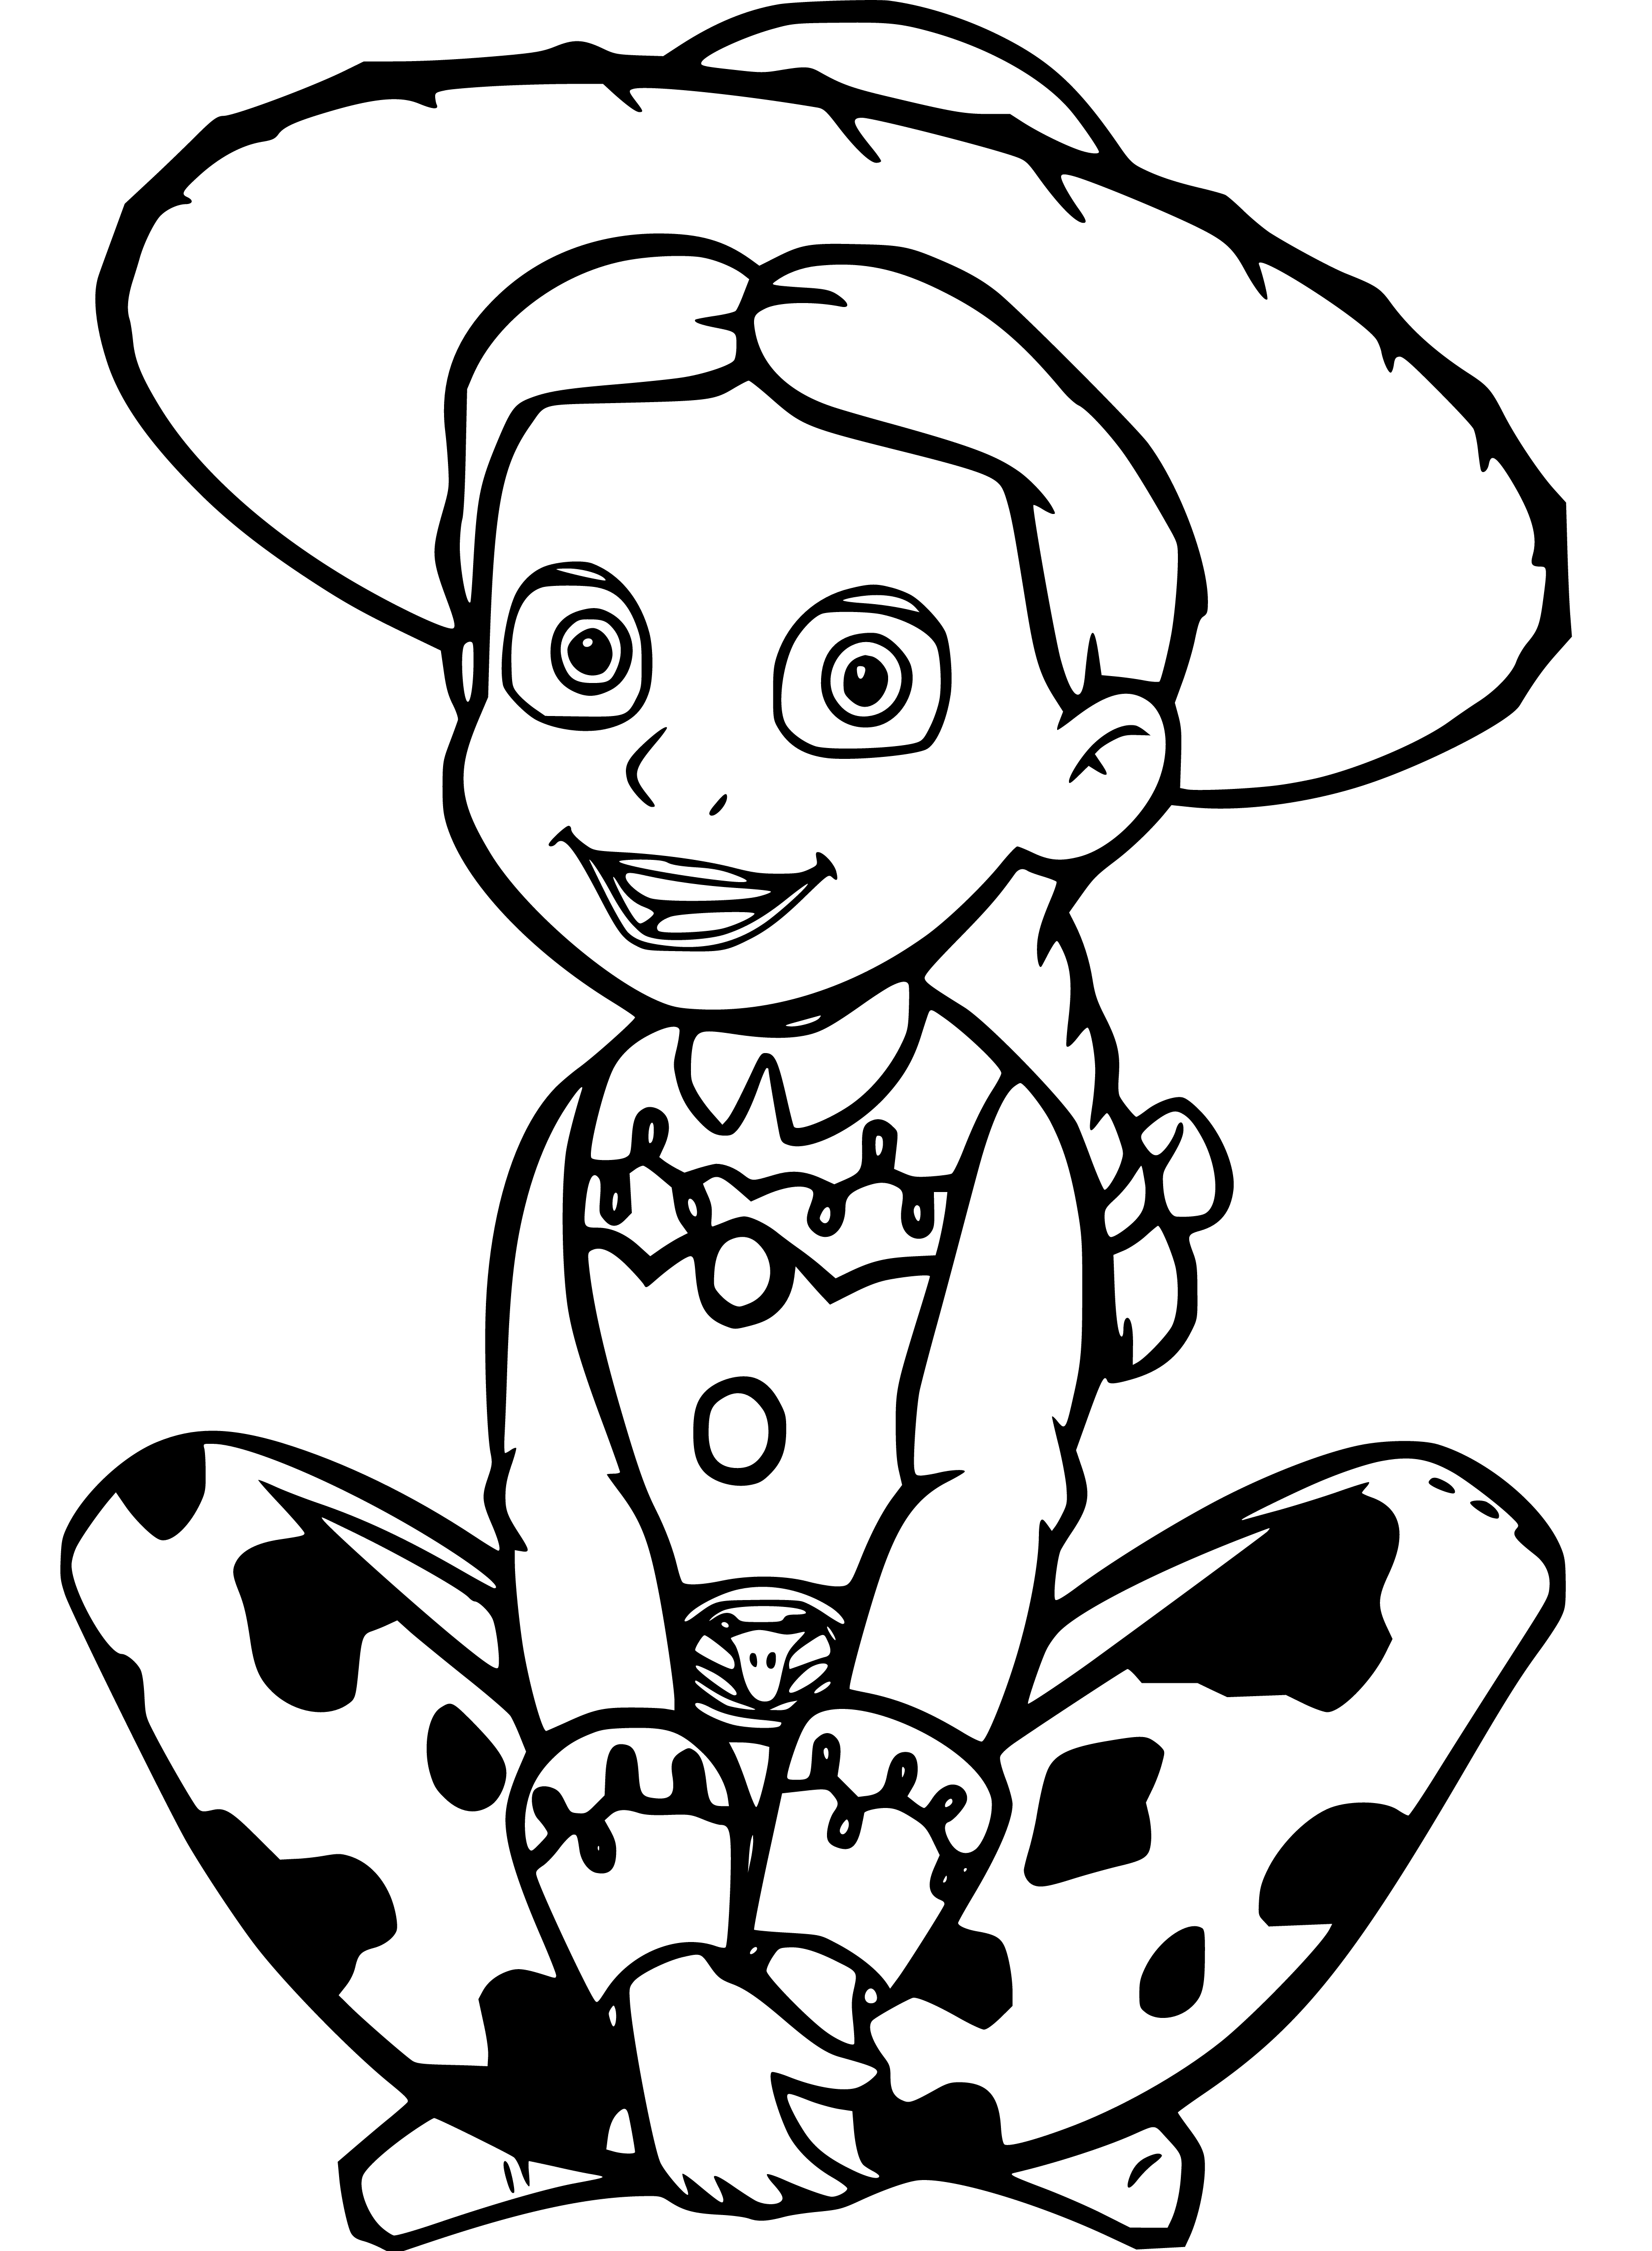 Jessie Toy Story Coloring Pages 10 Printable Sheets Simple To Draw